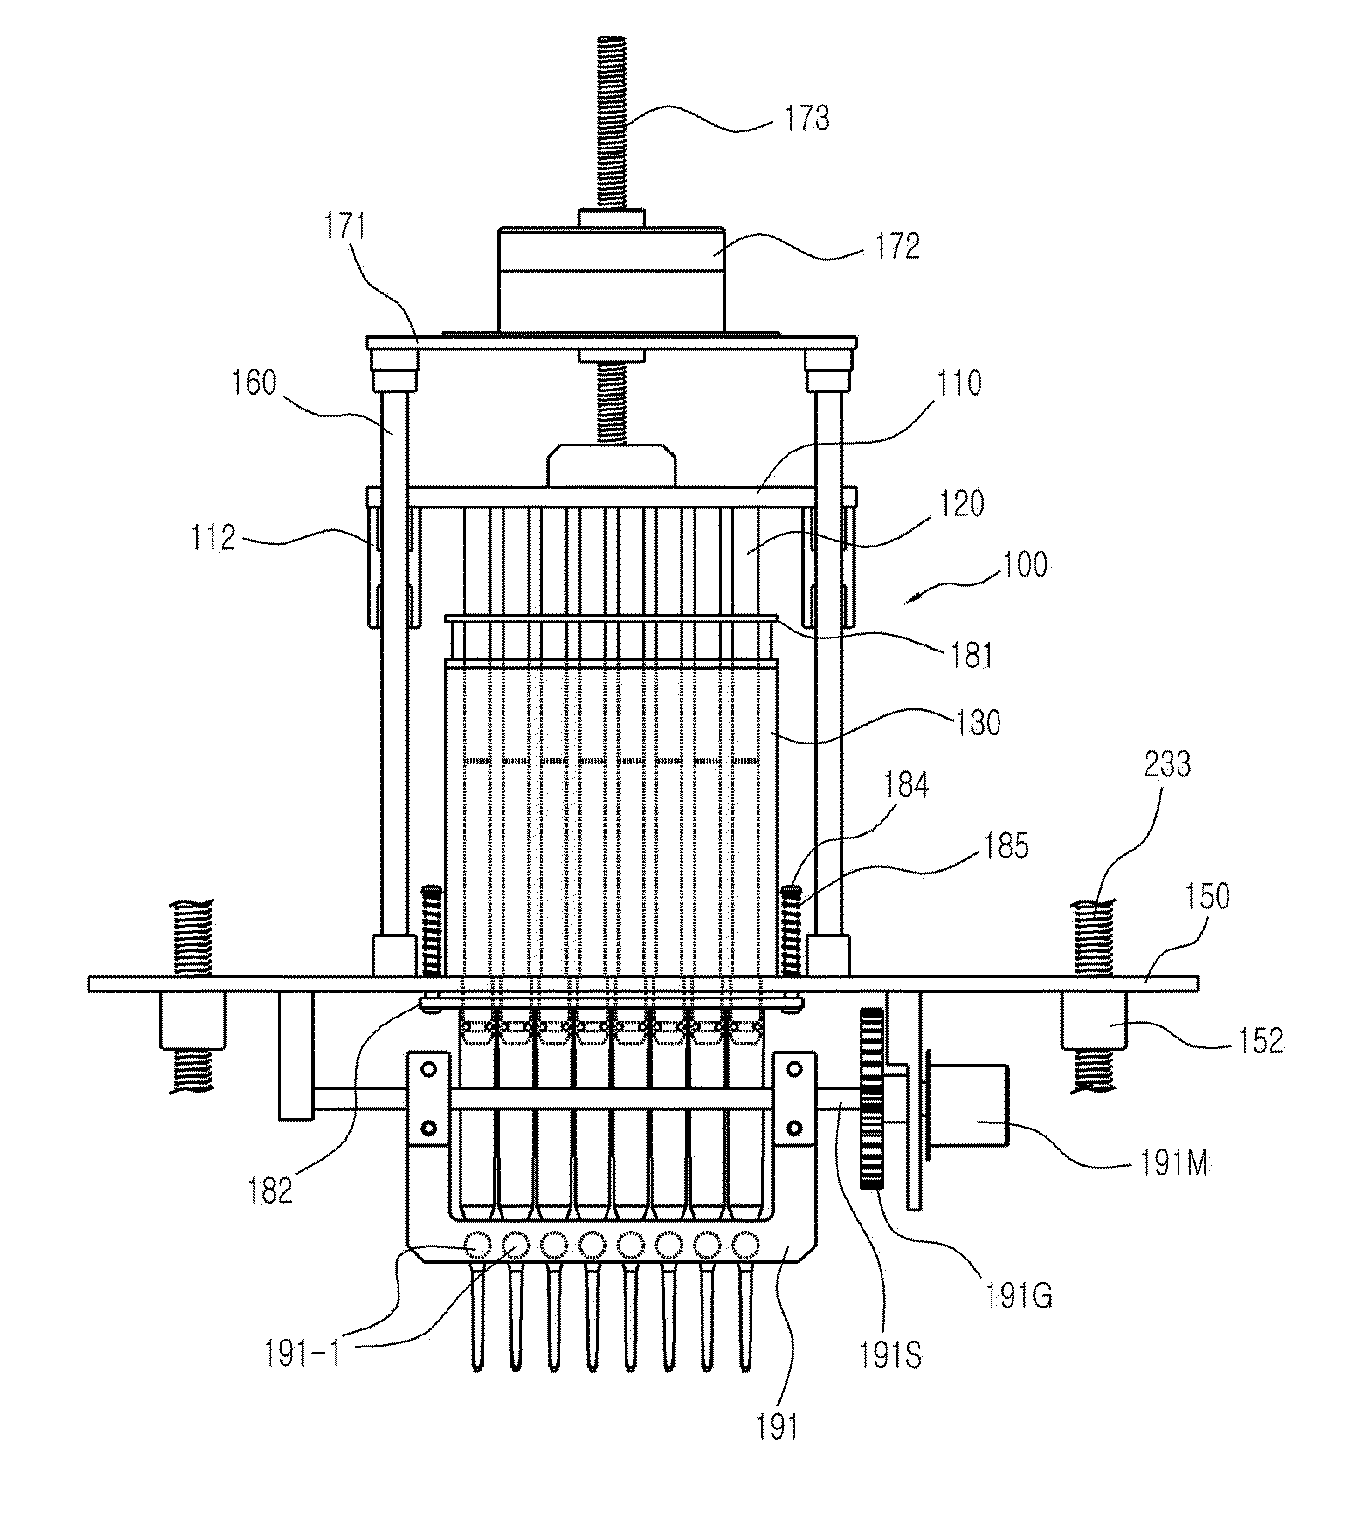 Automatic refining apparatus, multi-well plate kit and method for extracting hexane from biological samples